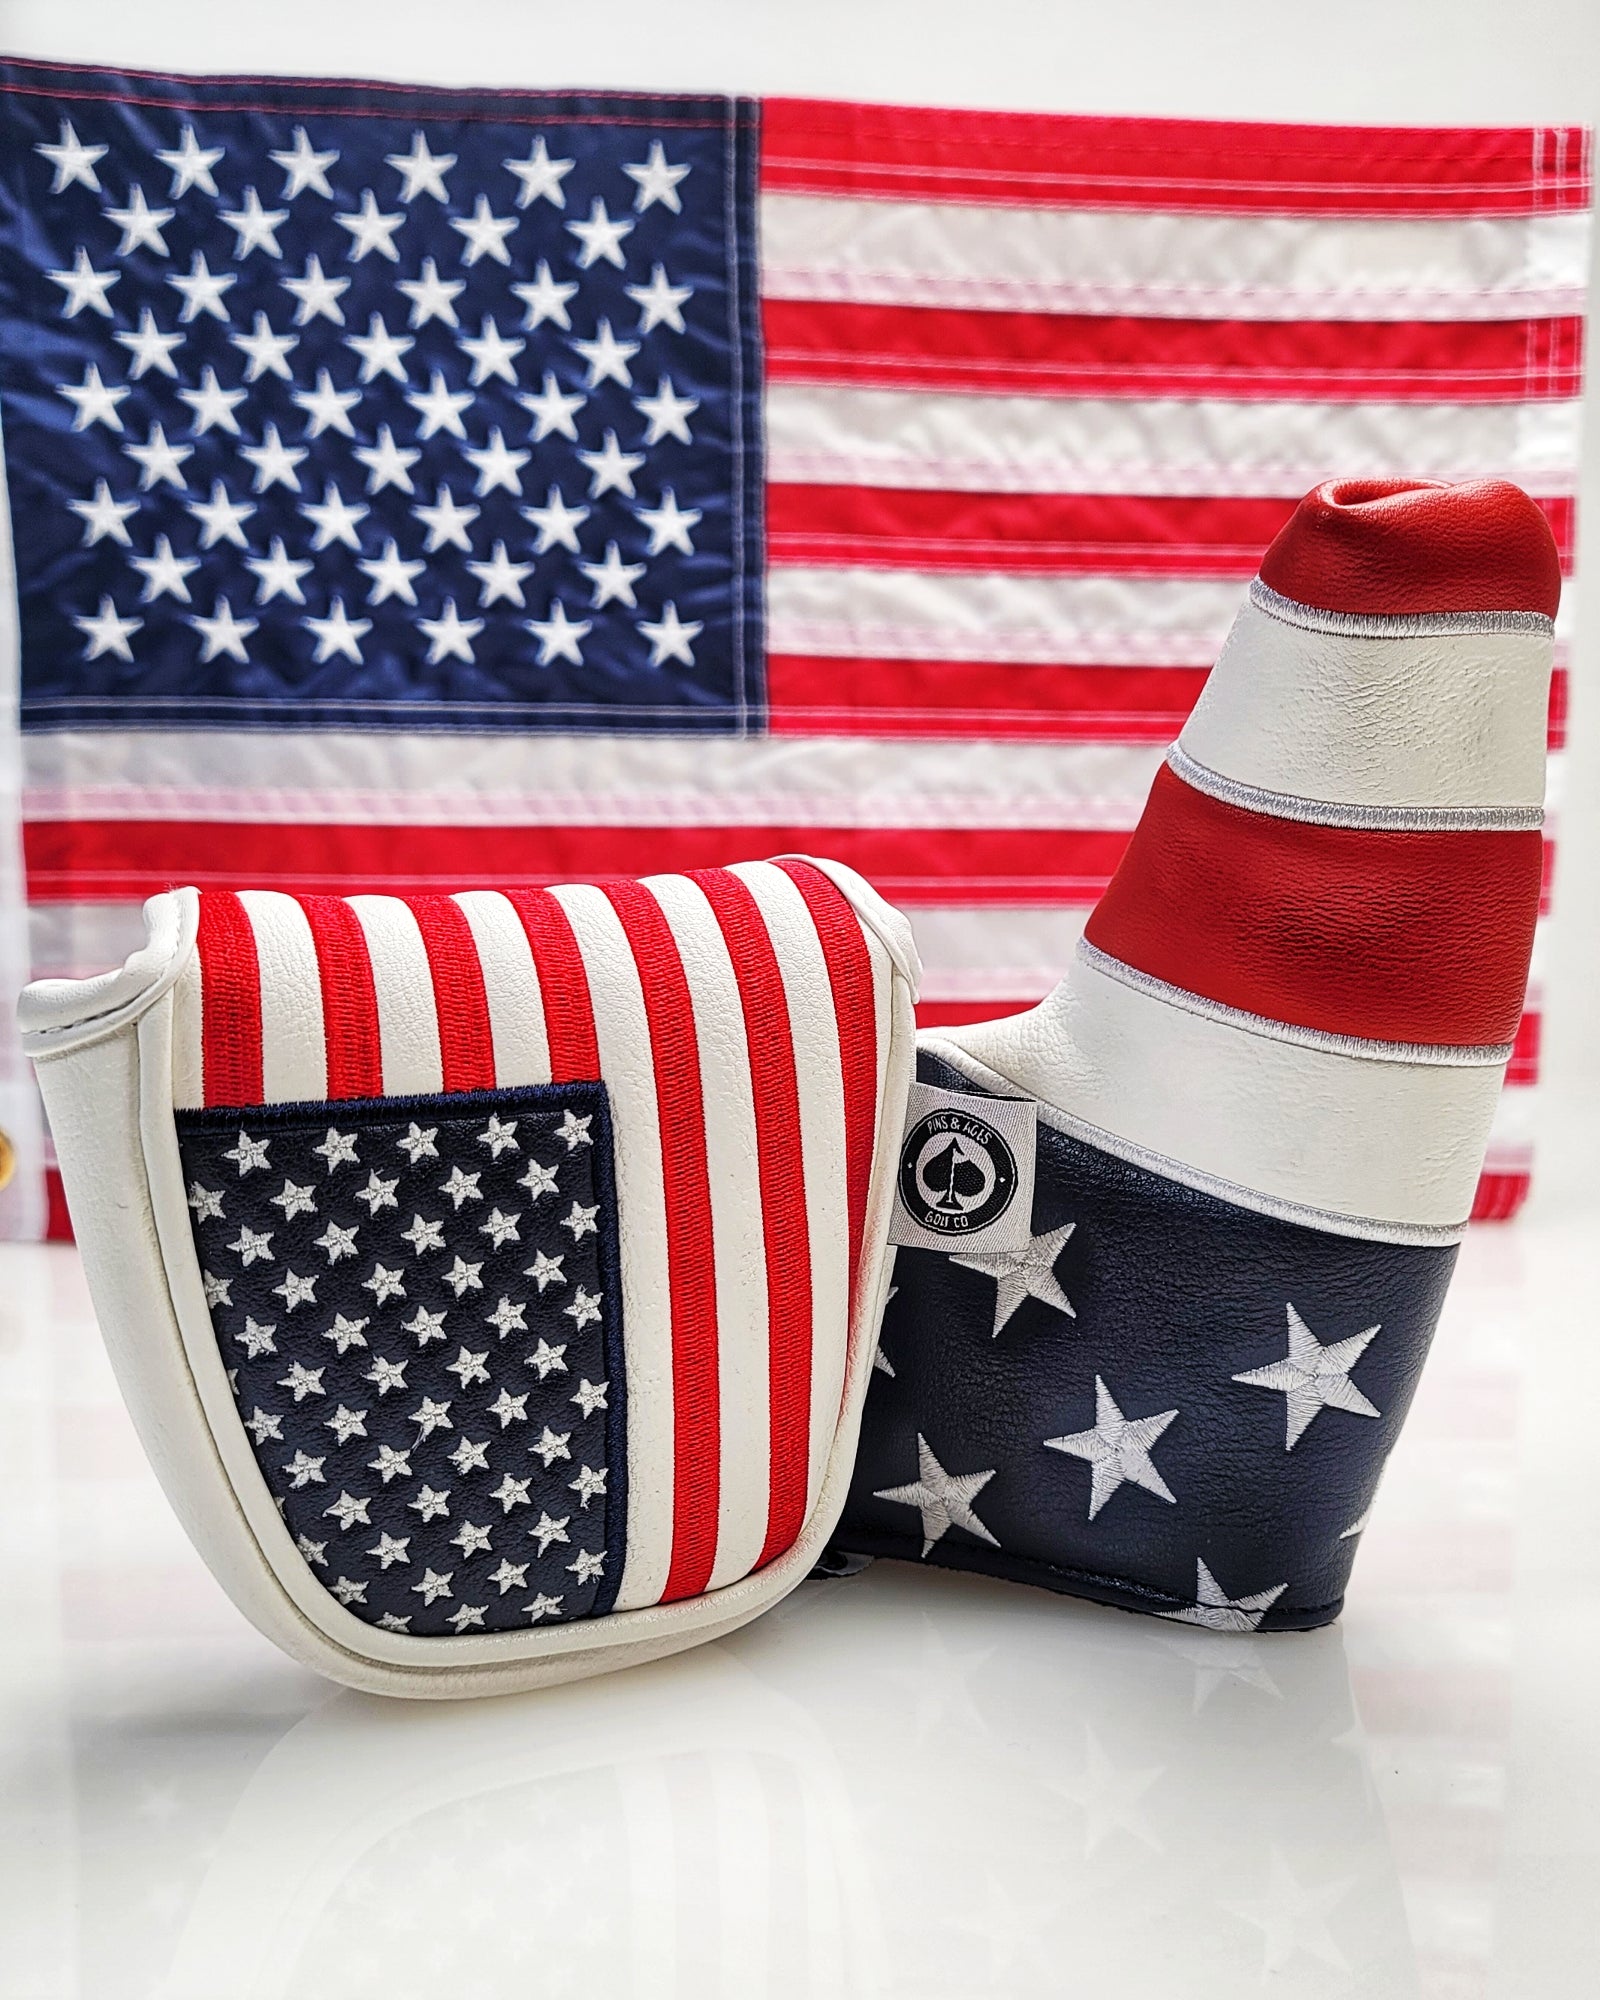 USA Tribute - Mallet Putter Cover